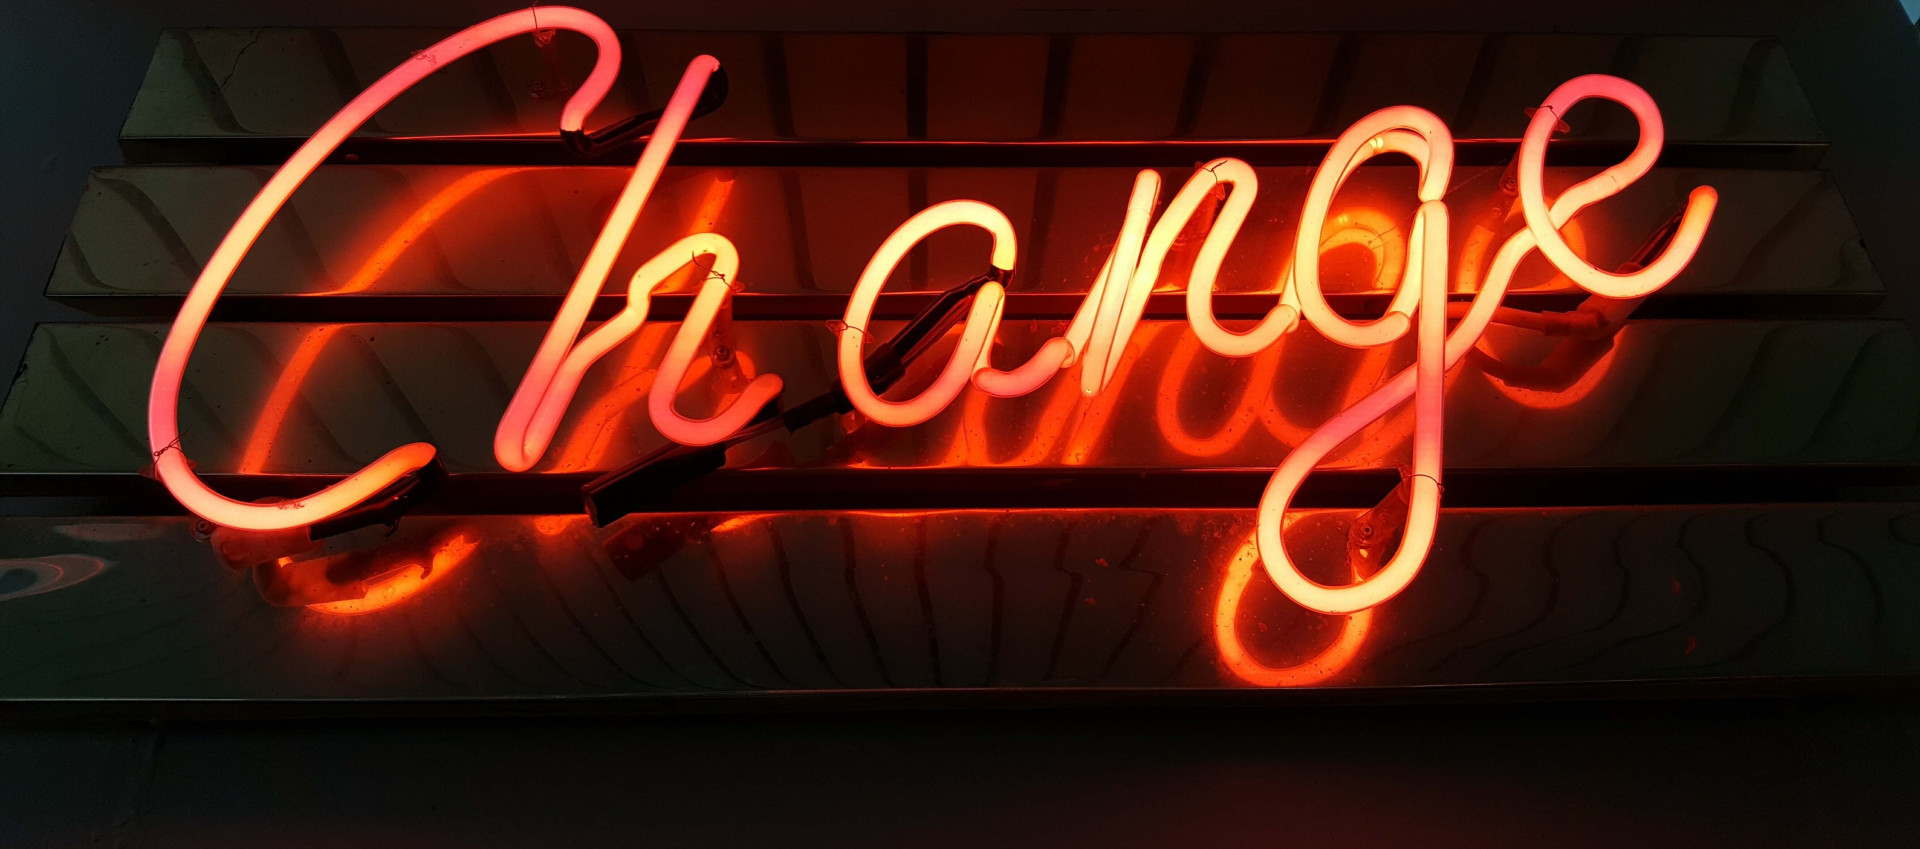 the word "change" lit up in red neon colour on a dark background